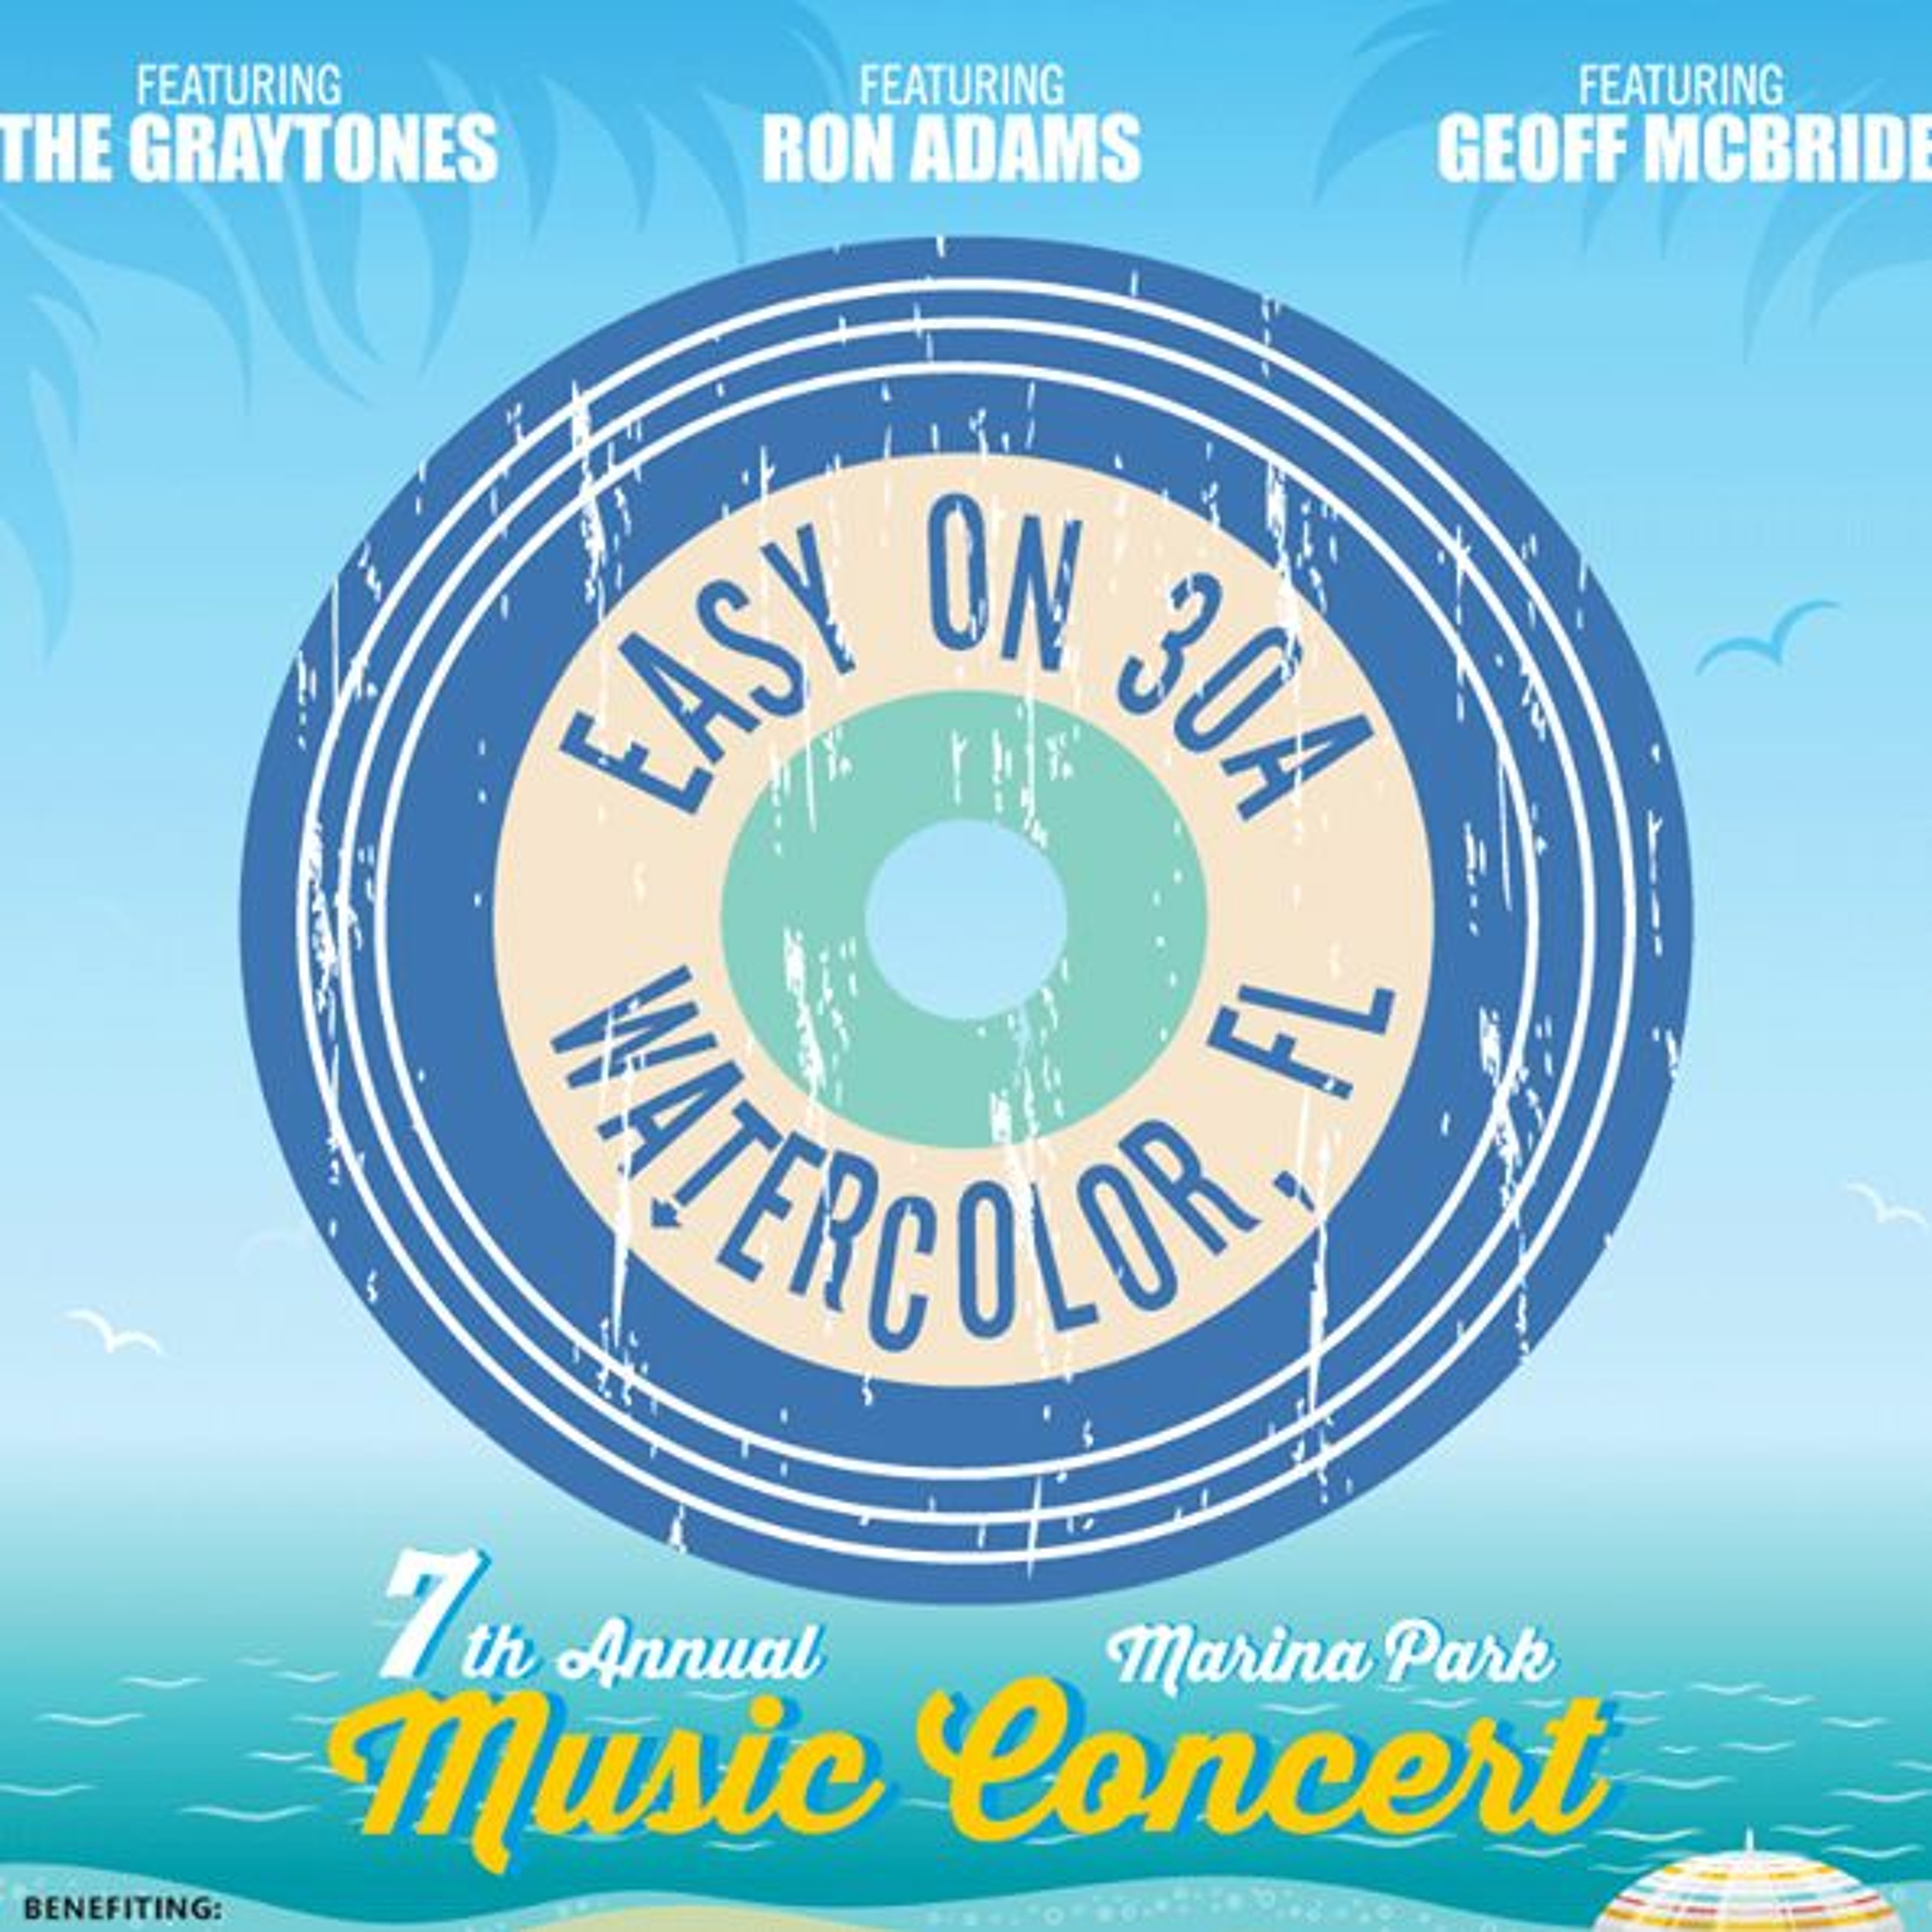 30A Show: Easy On 30A Concert